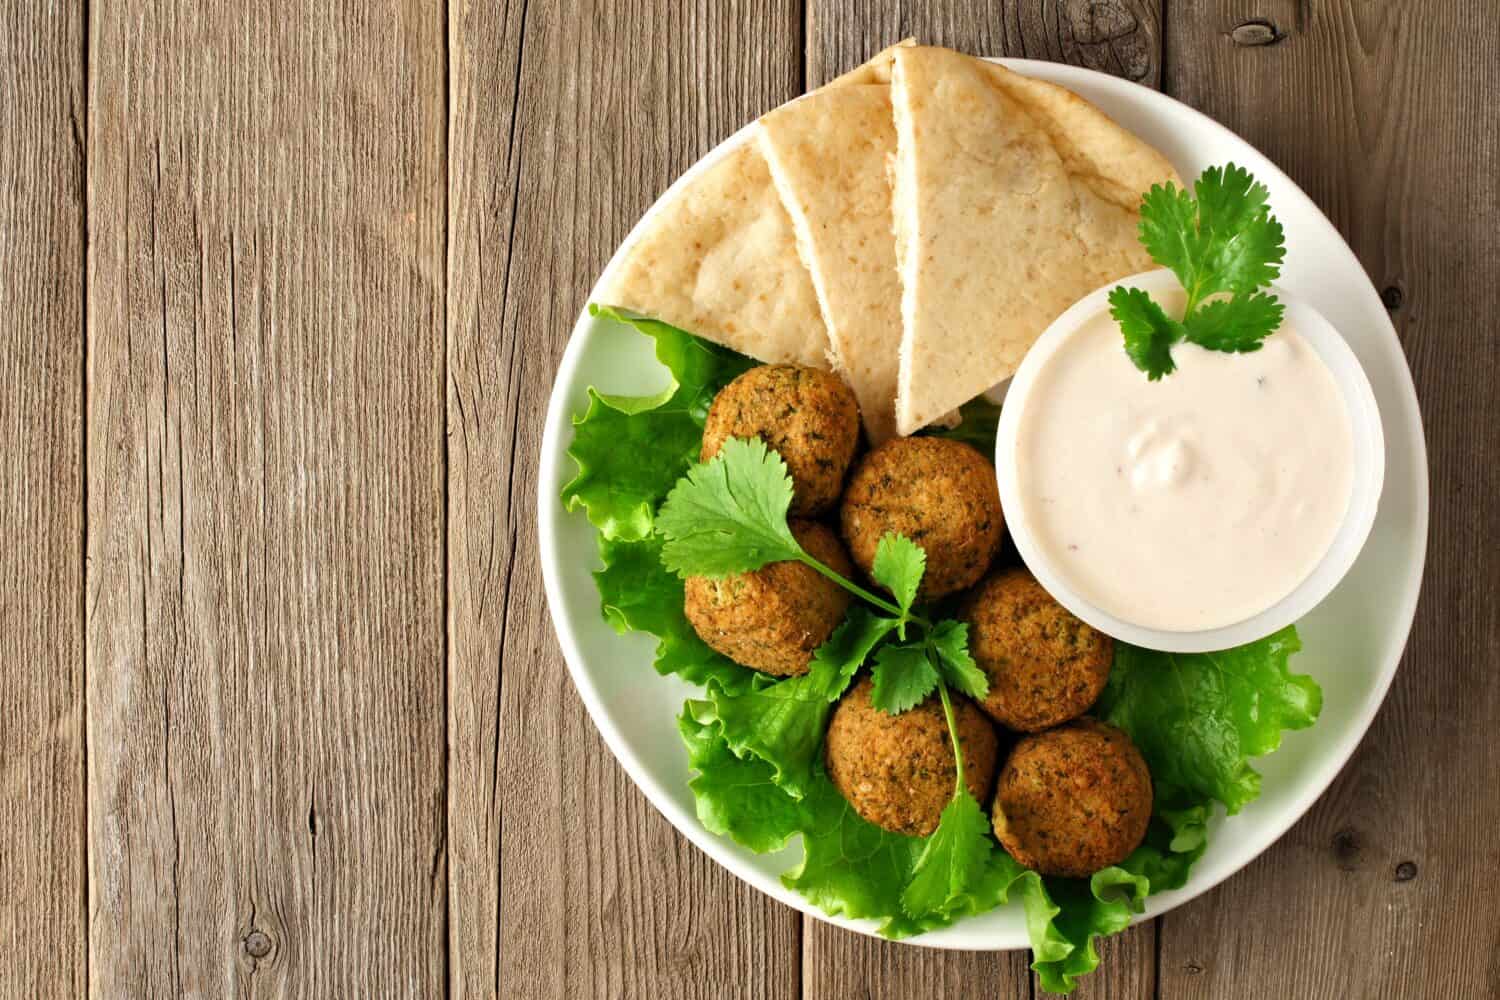 Plate of falafel with pita bread and tzatziki sauce on wooden table. View from above